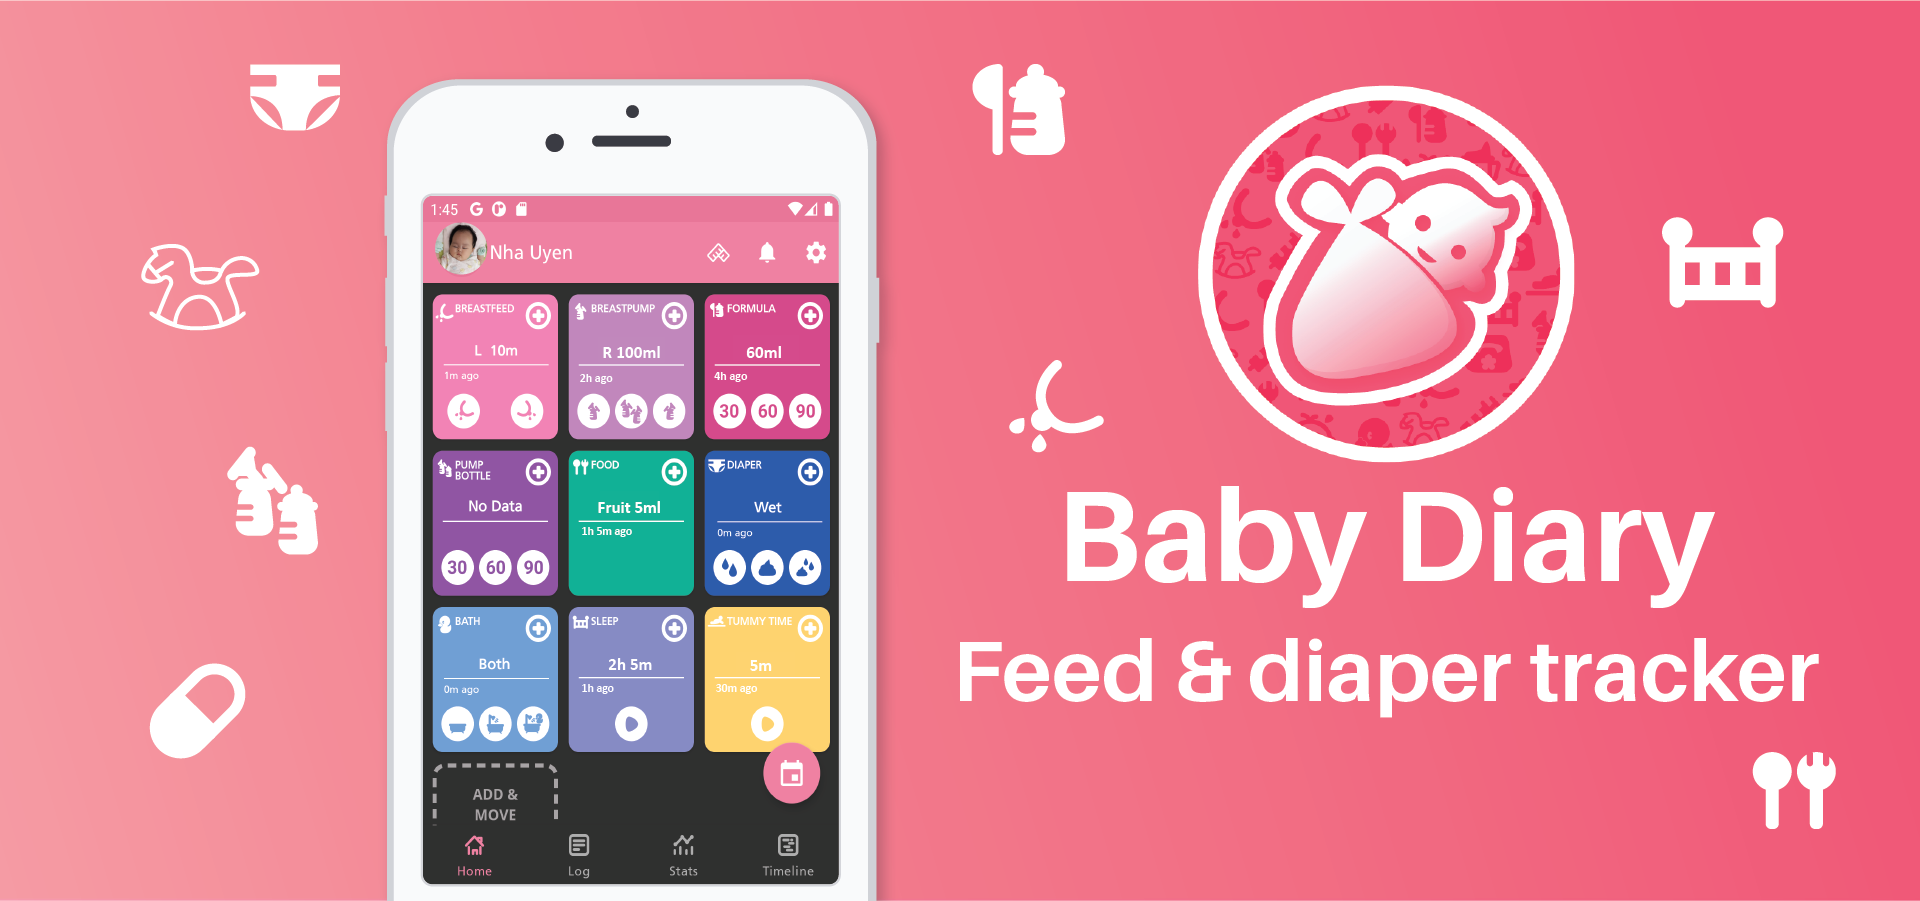 Baby Diary banner